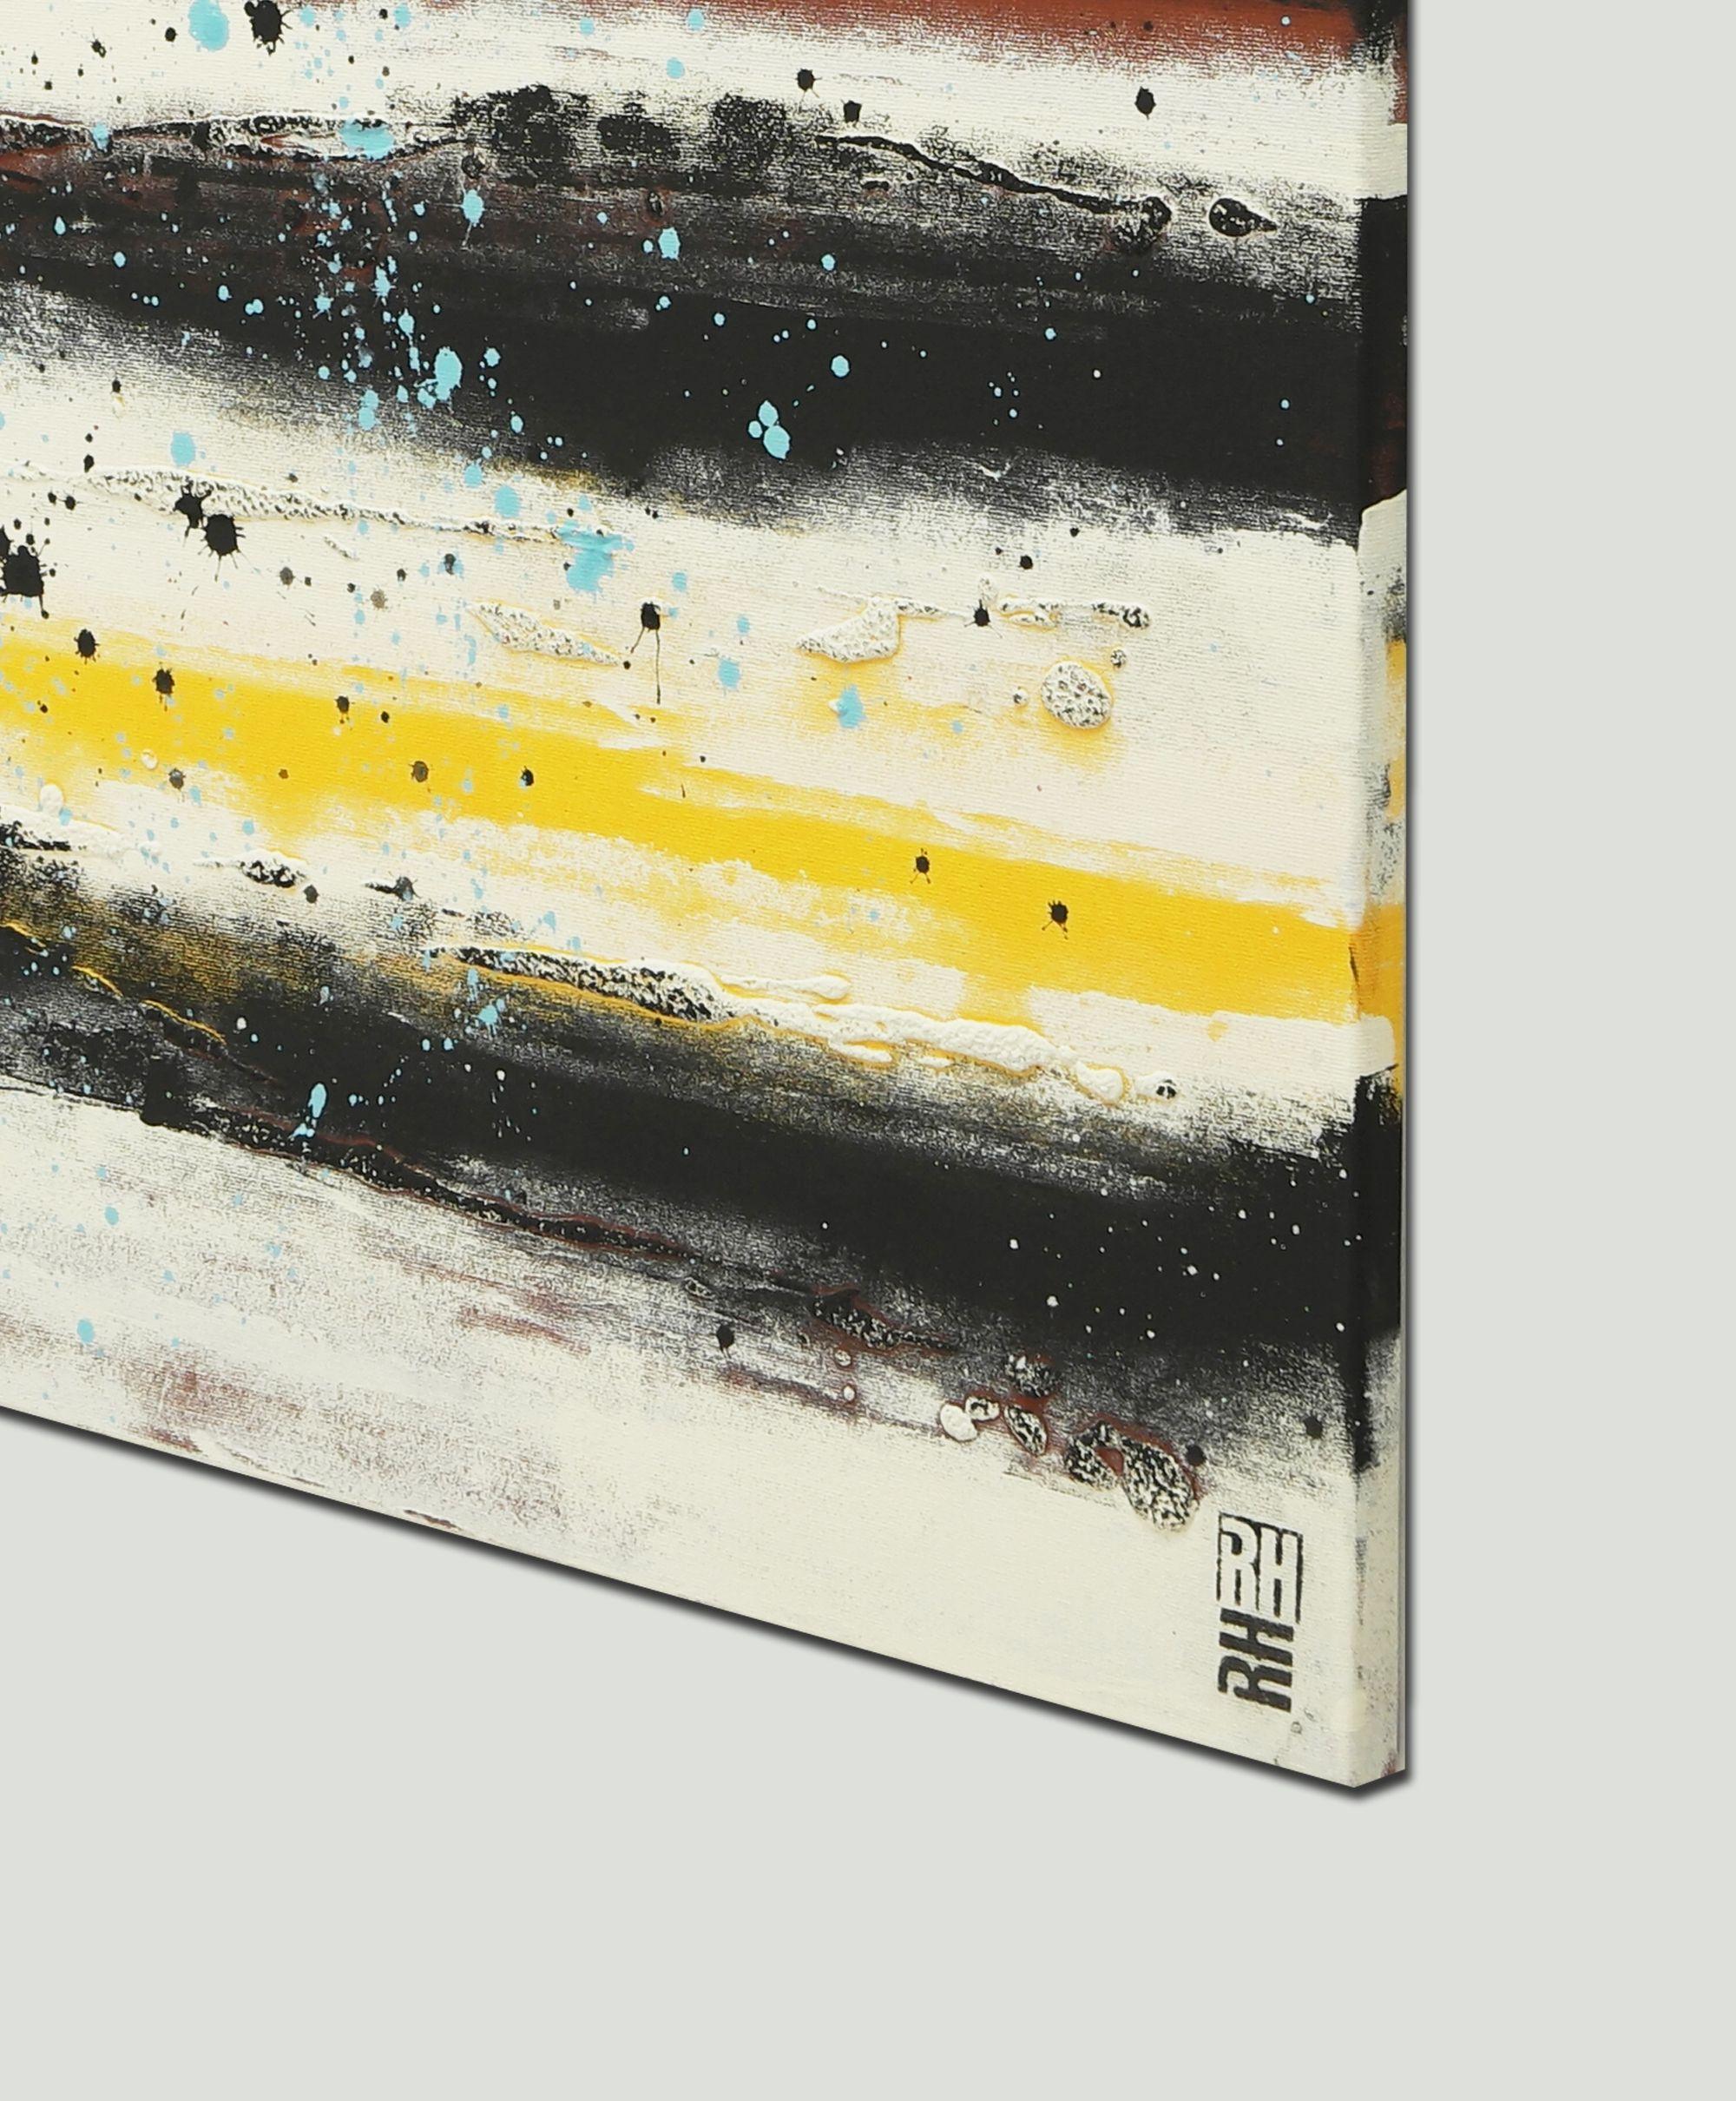 Acrylic Abstract Painting, Original artwork created by Ronald Hunter.    A touch of color to warm up your home. For this painting I have combined a stylish off-white (or pale beige) with dark grey and warm undertones. The light blue splatters bring